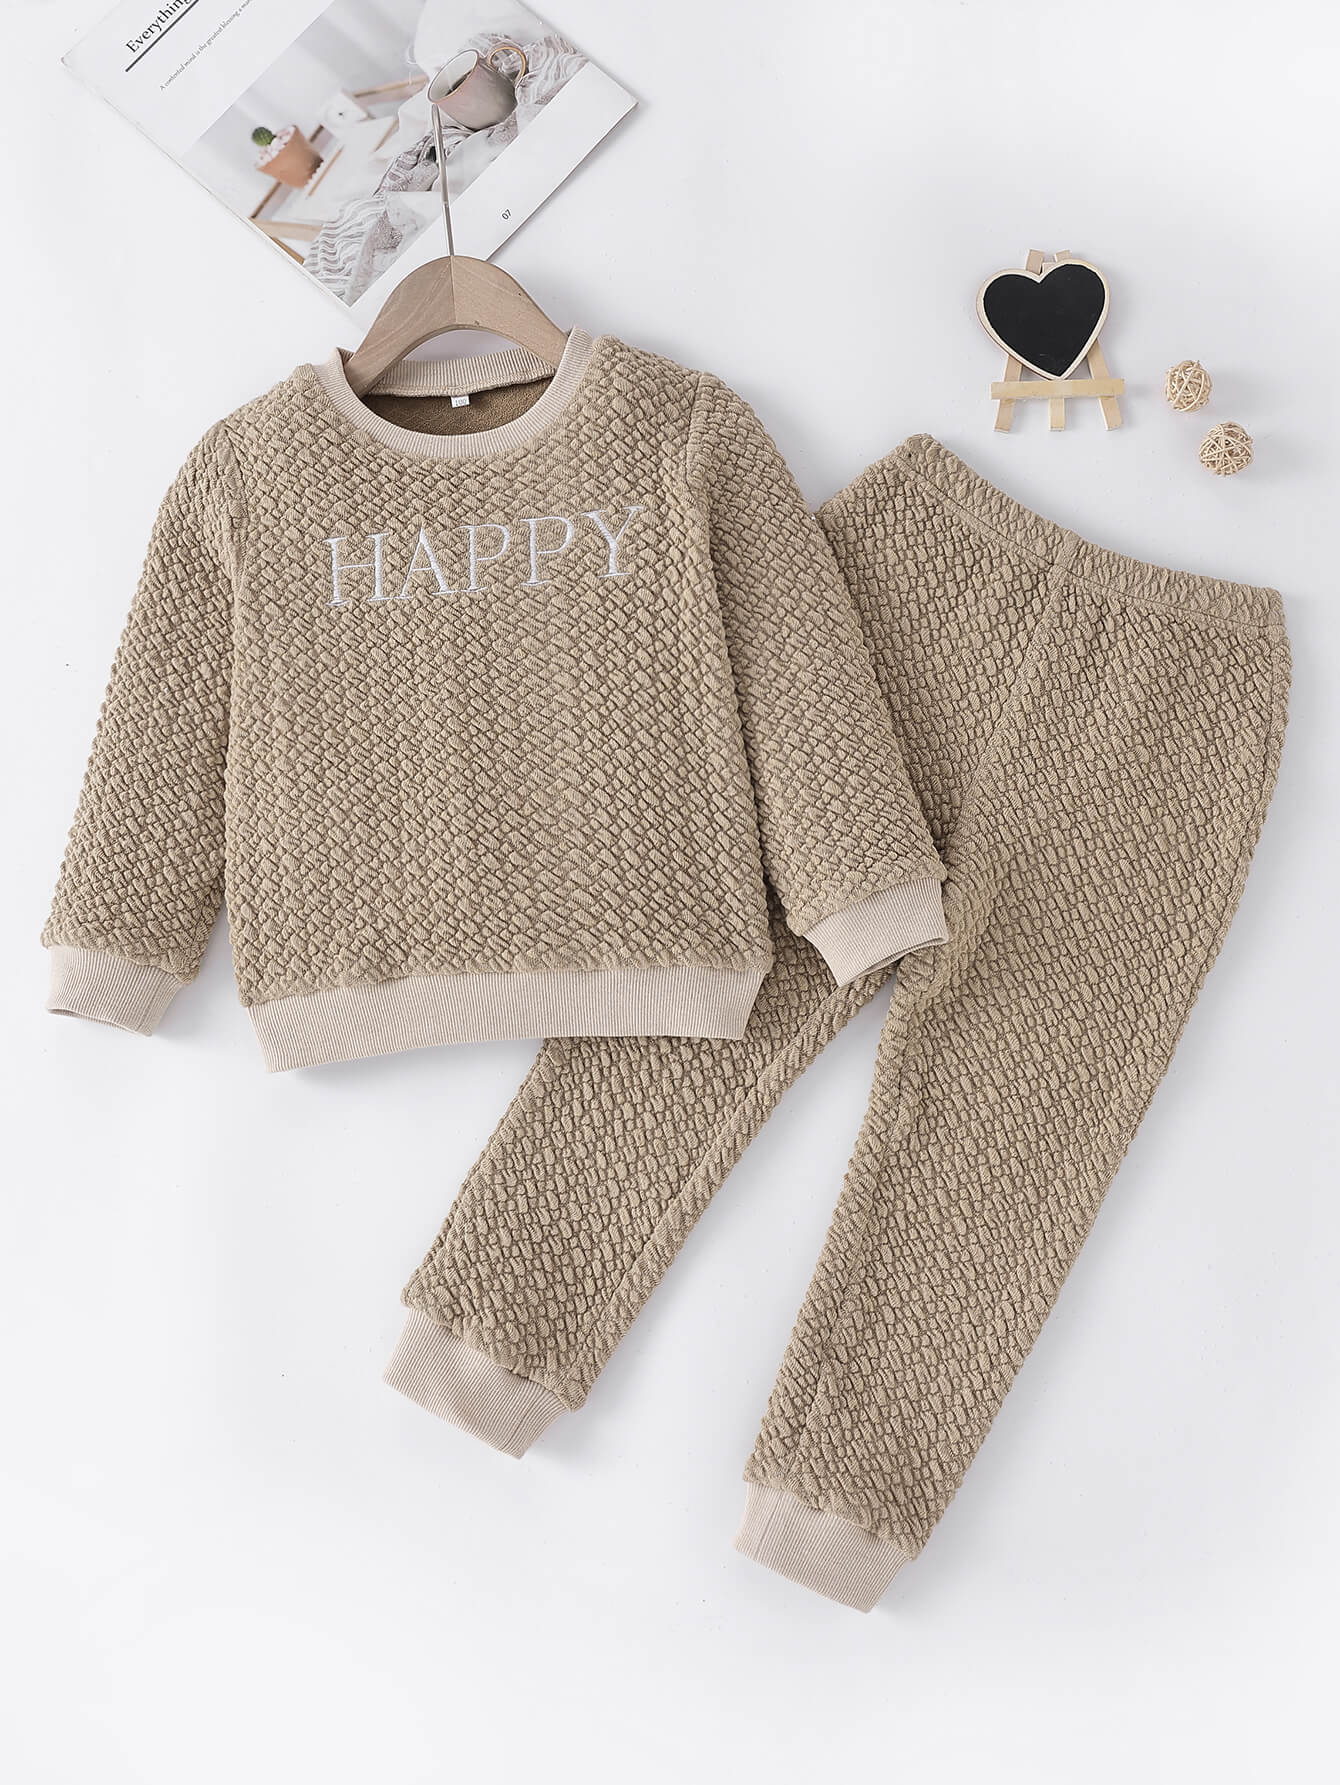 Kids HAPPY Textured Top and Joggers Set_2